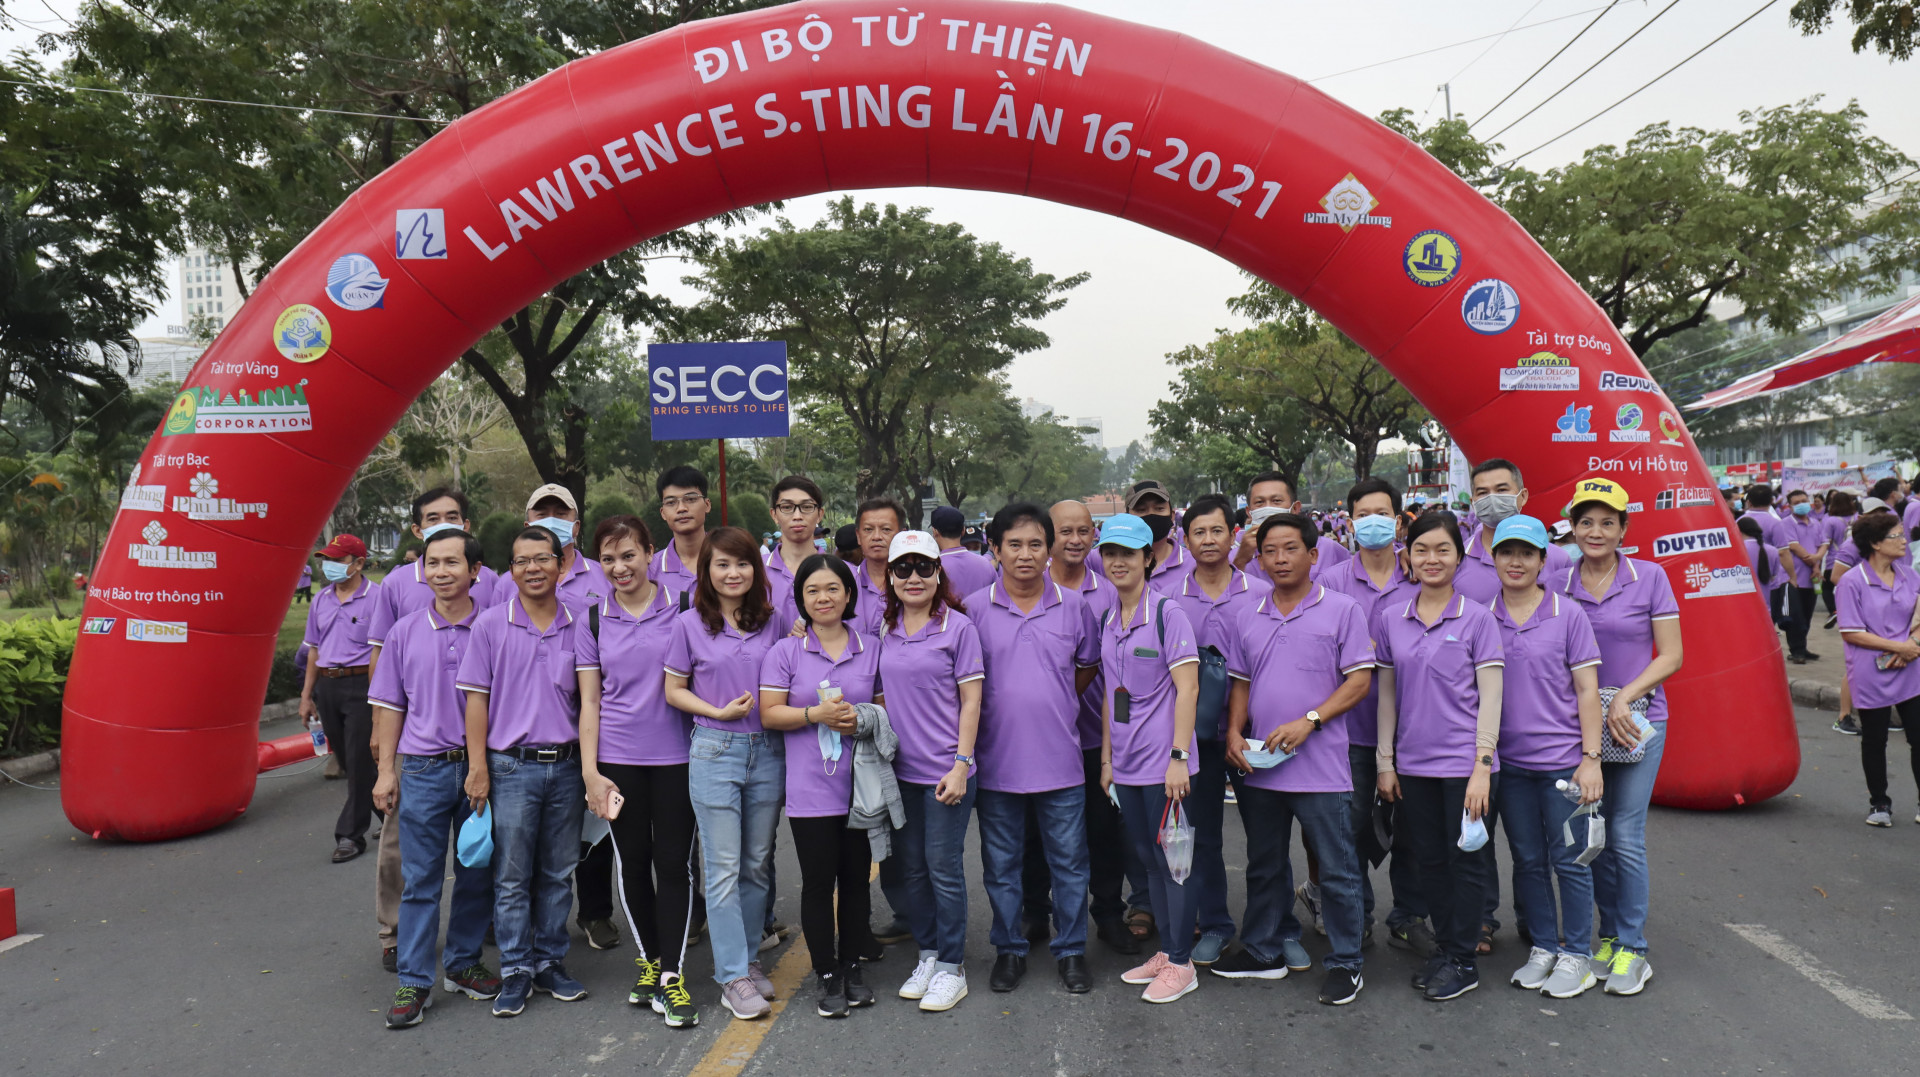 Lawrence S. Ting Charity Walk